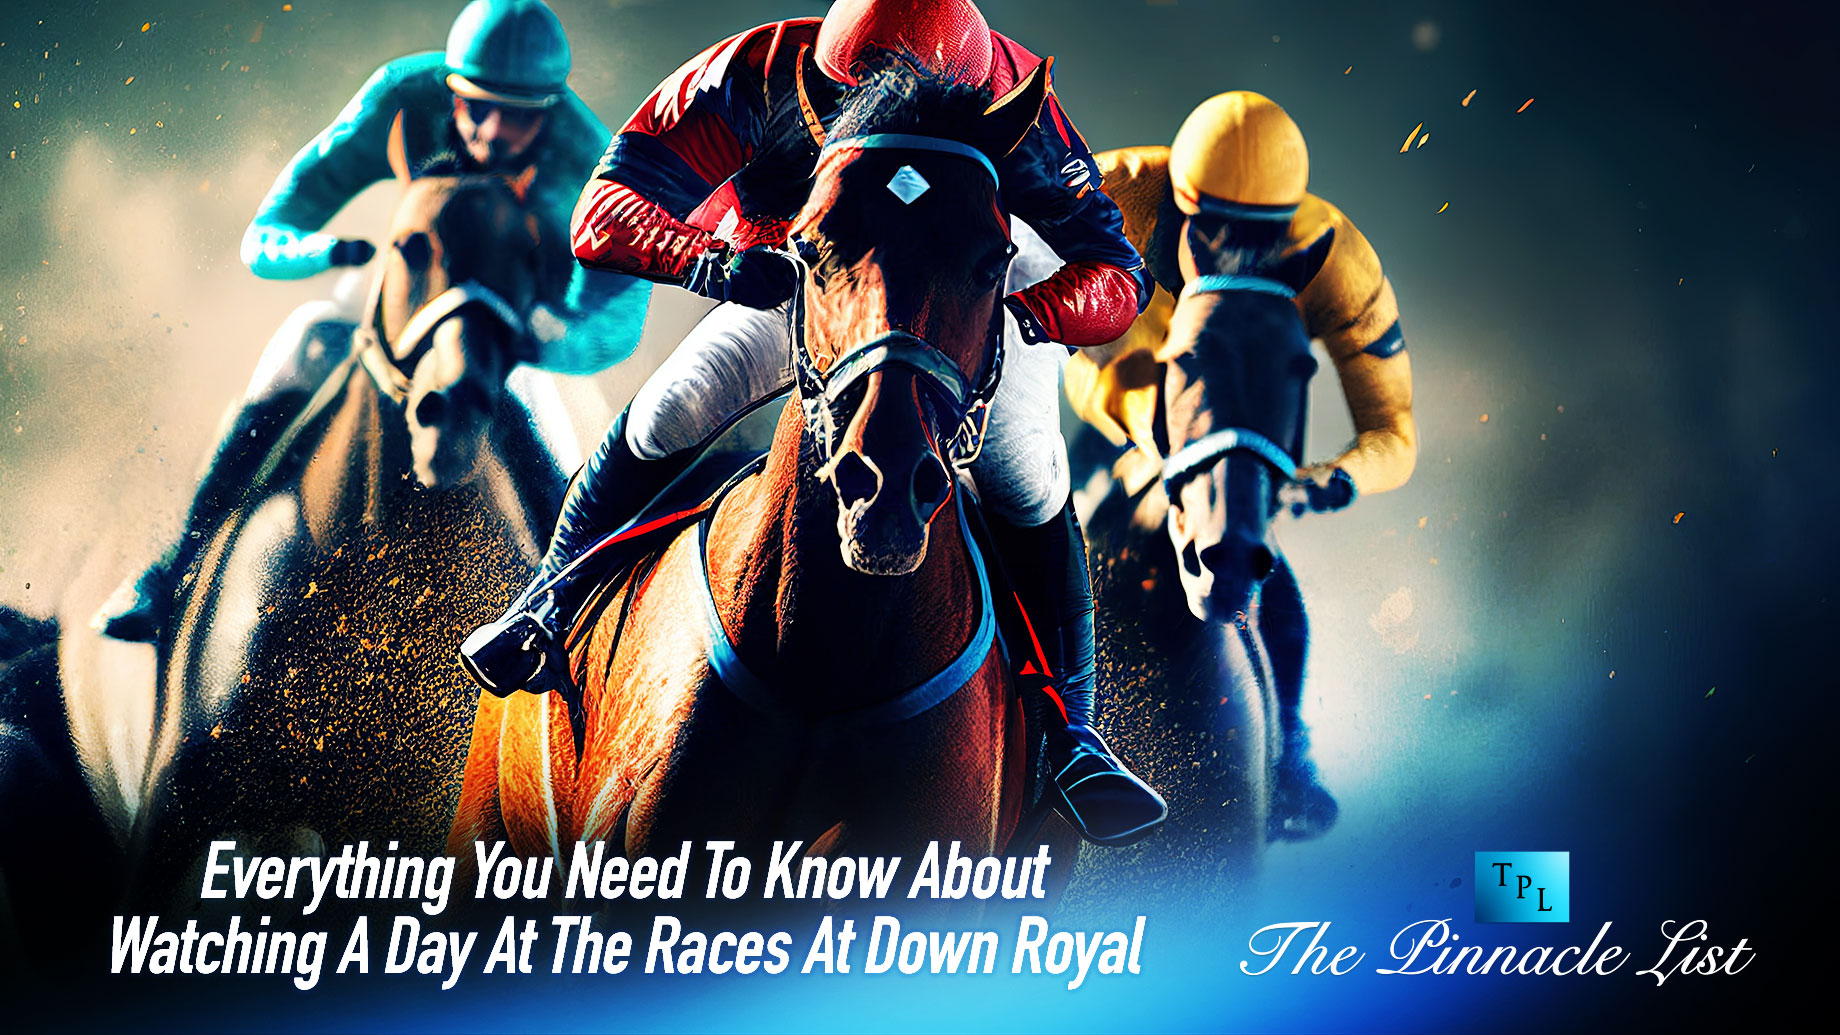 Everything You Need To Know About Watching A Day At The Races At Down Royal